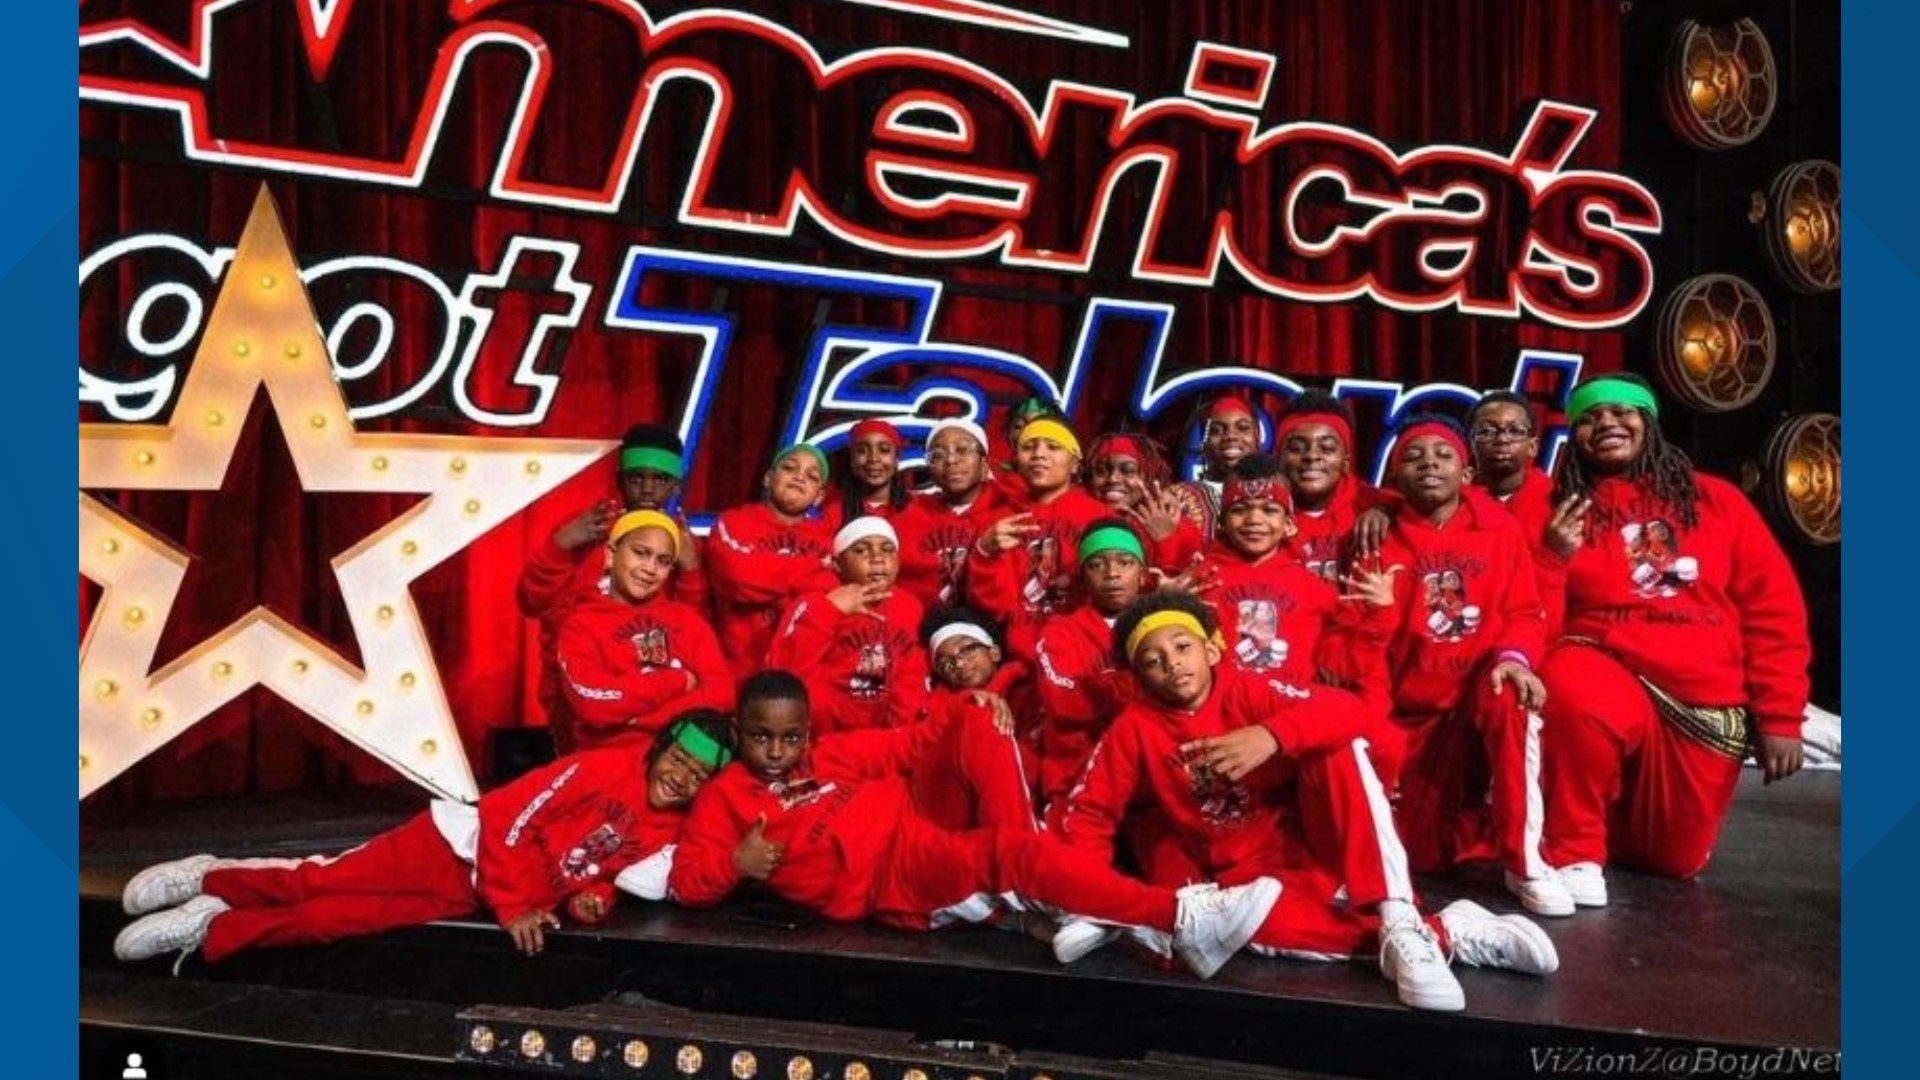 The Lil Rascalz drumline of the Atlanta Drum Academy auditioned for Season 18 of NBC’s ‘America’s Got Talent' and got the golden buzzer.